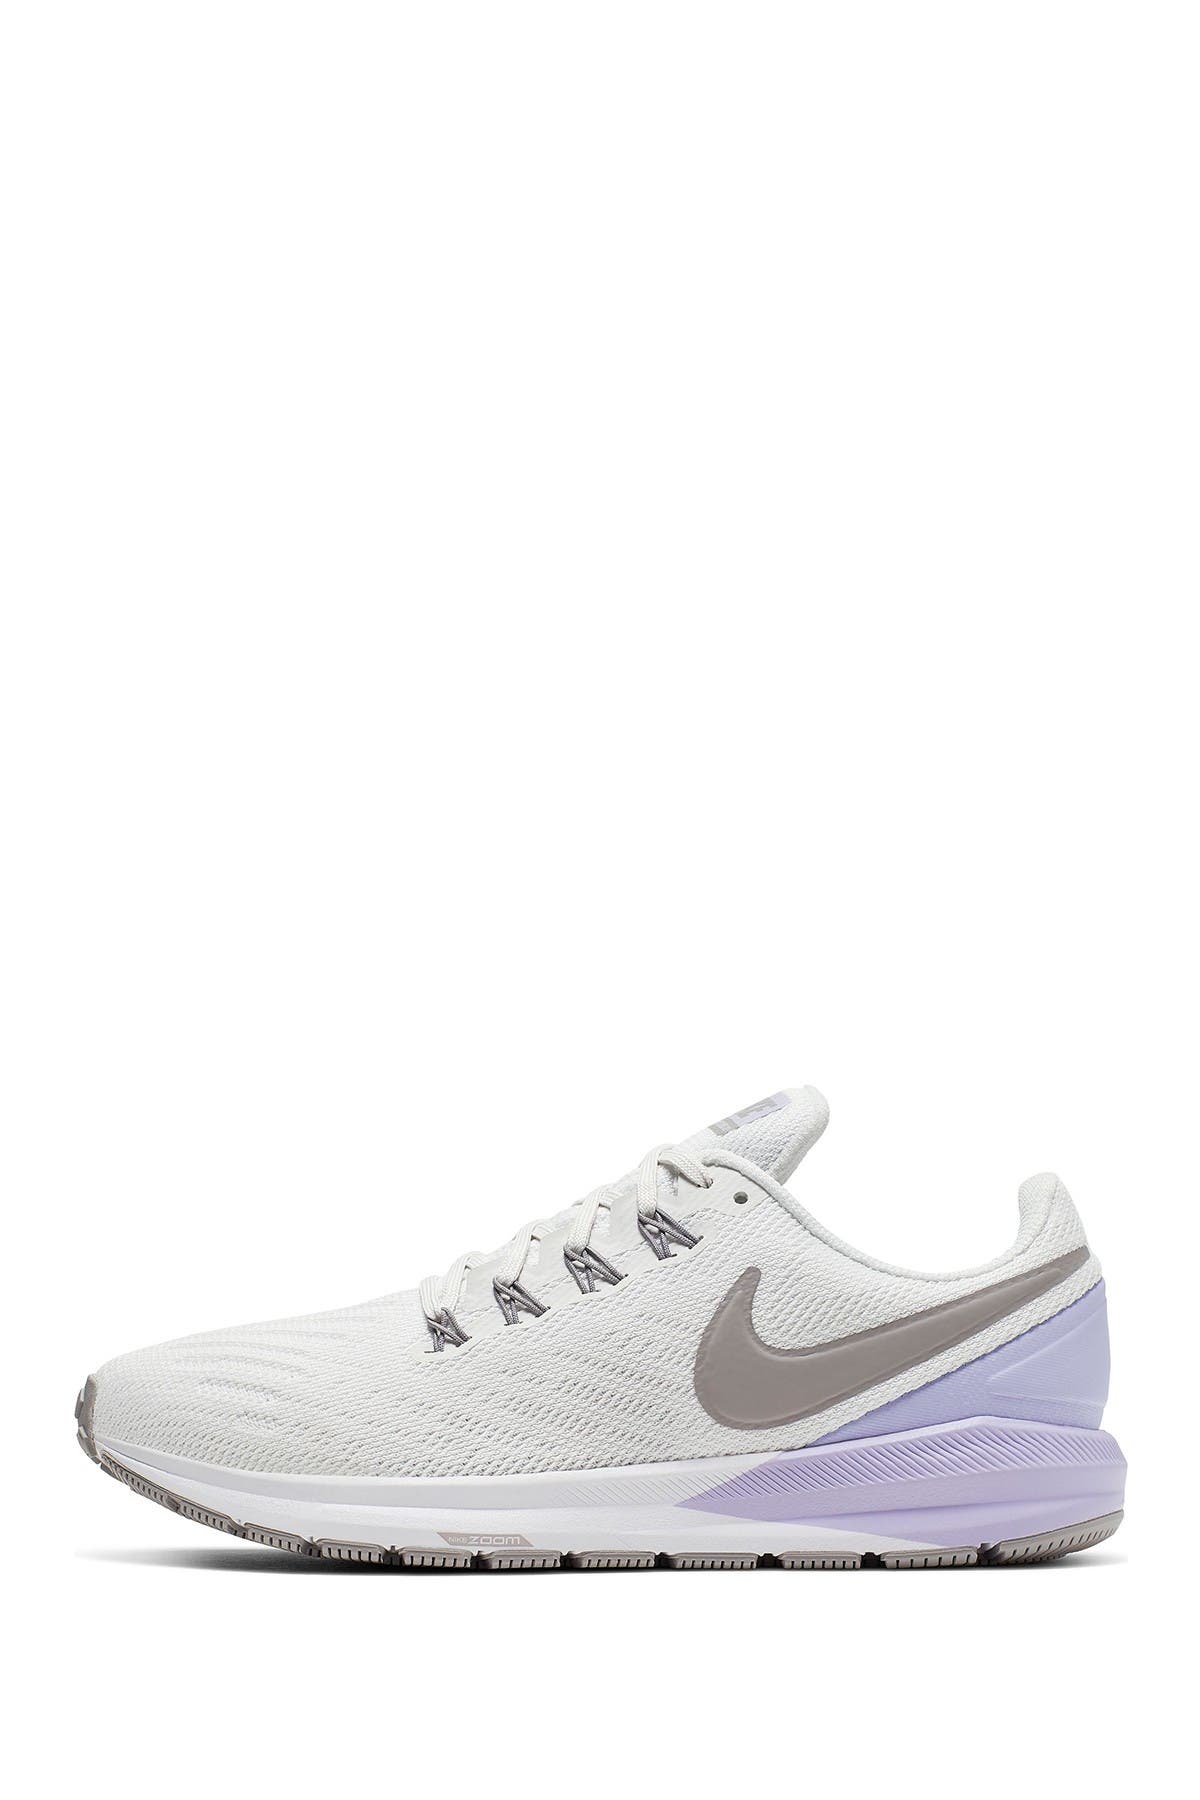 nike zoom structure 22 women's